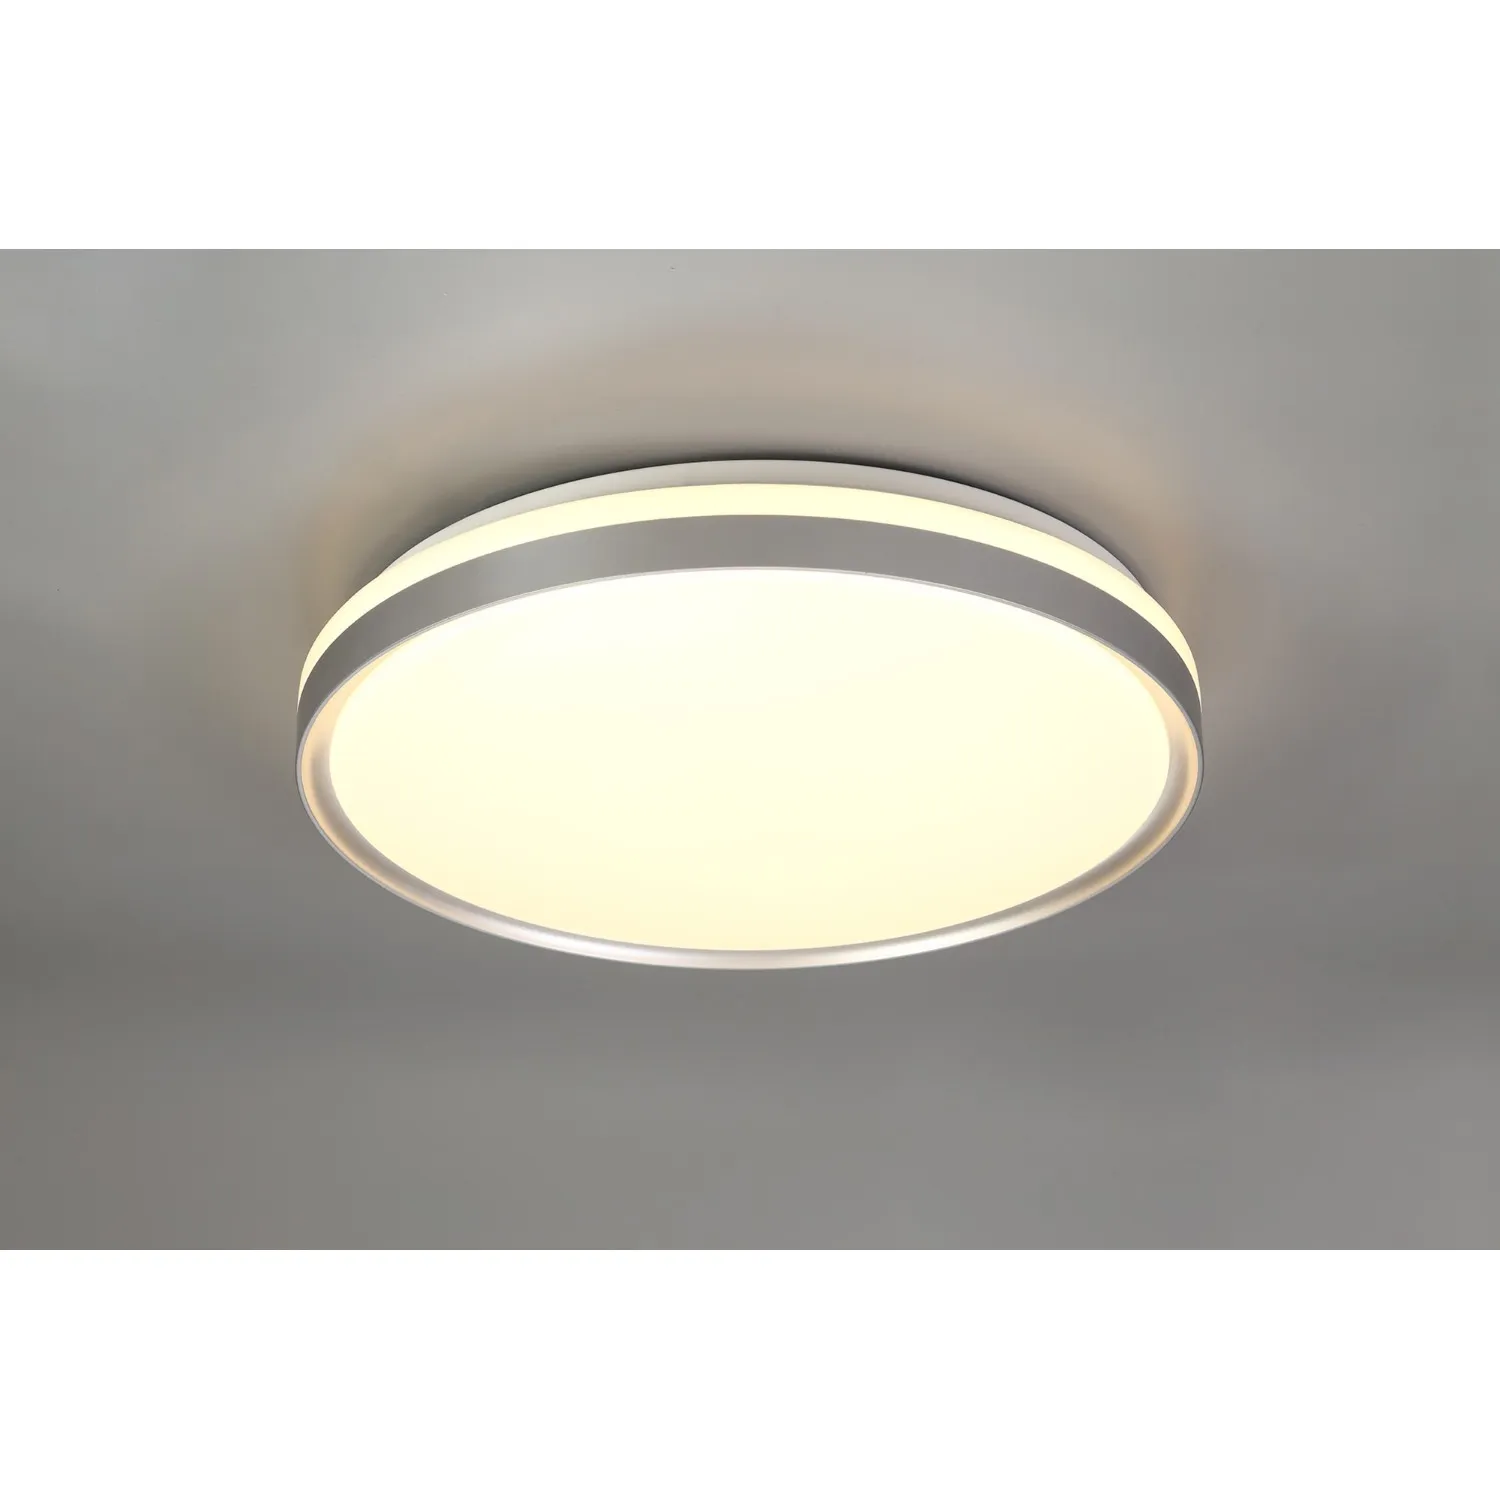 Rye Ceiling 48cm, 1 x 36W LED 3 Step Dimmable, 3000K, 1575lm, IP44, Silver White Acrylic, 3yrs Warranty